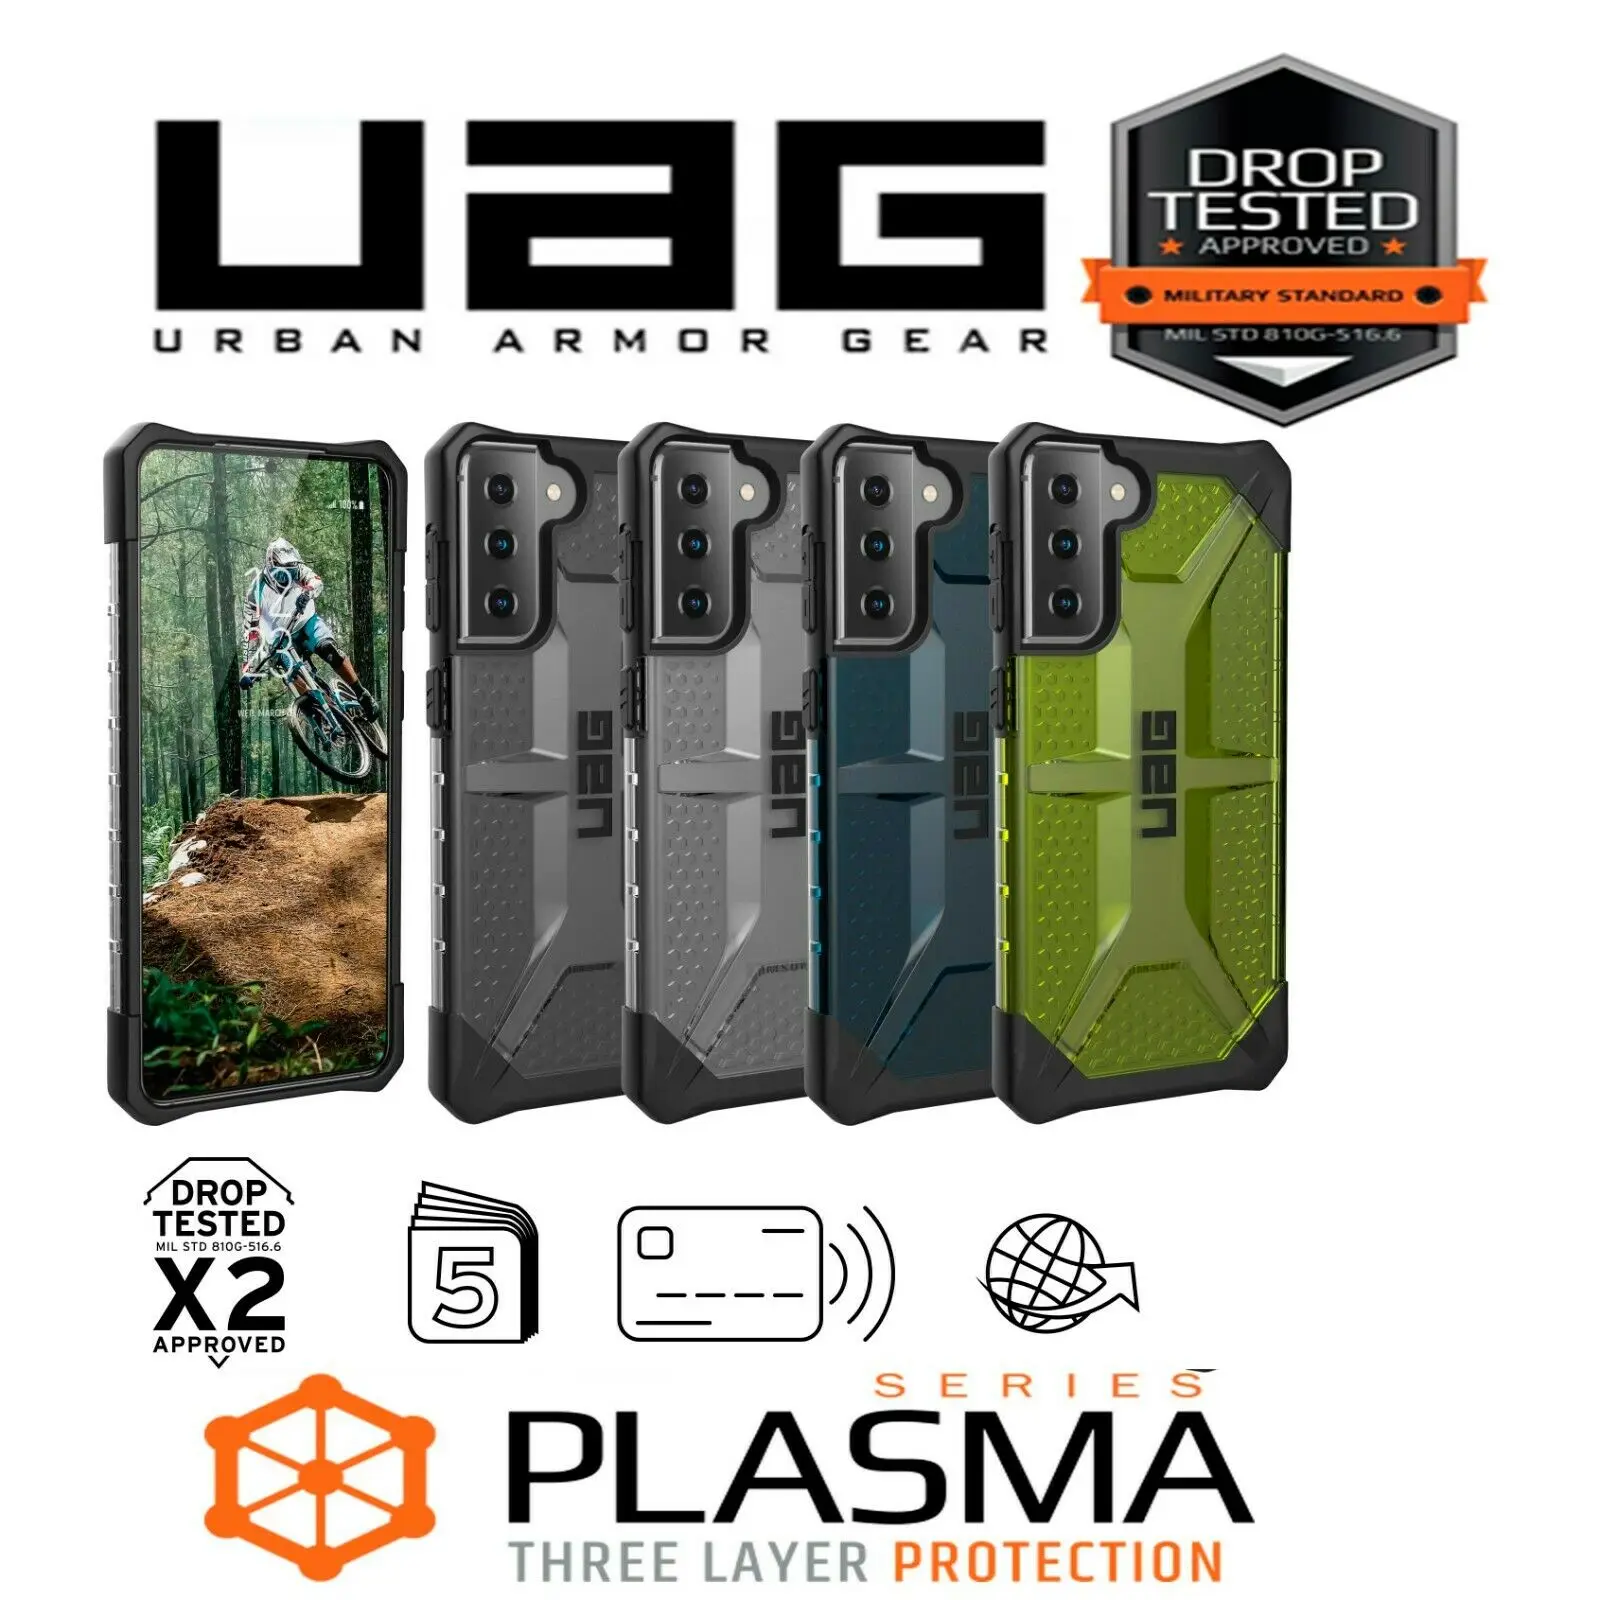 

UAG Urban Armor Gear Plasma Military Spec Case Cover For Samsung Galaxy S21 Ultra 5G for Galaxy S21 Plus + S21 Protection Casing